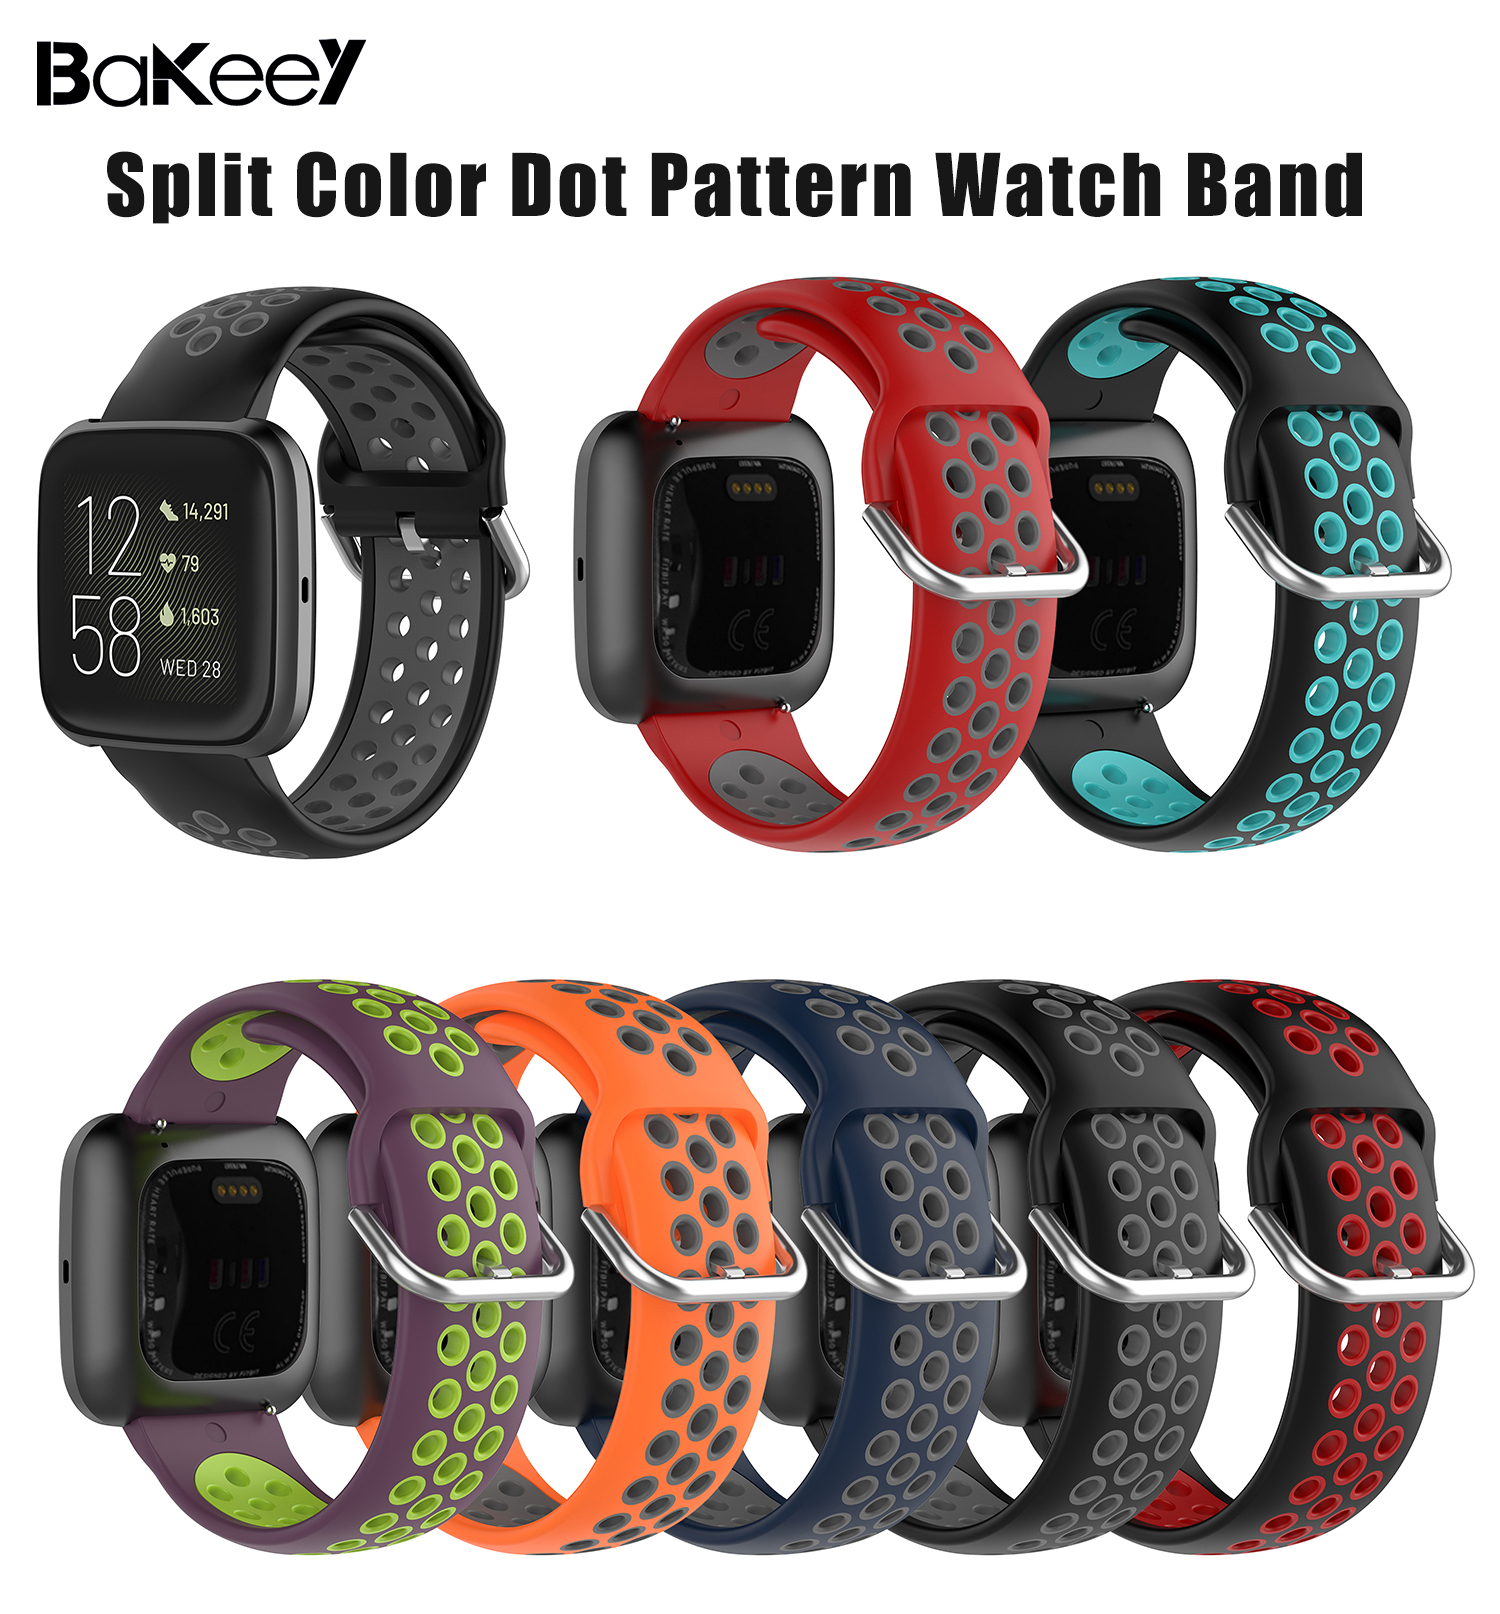 Bakeey-Split-Color-Dot-Pattern-Breathable-Waterproof-Soft-Silicone-Watch-Band-Strap-Replacement-for--1747379-1